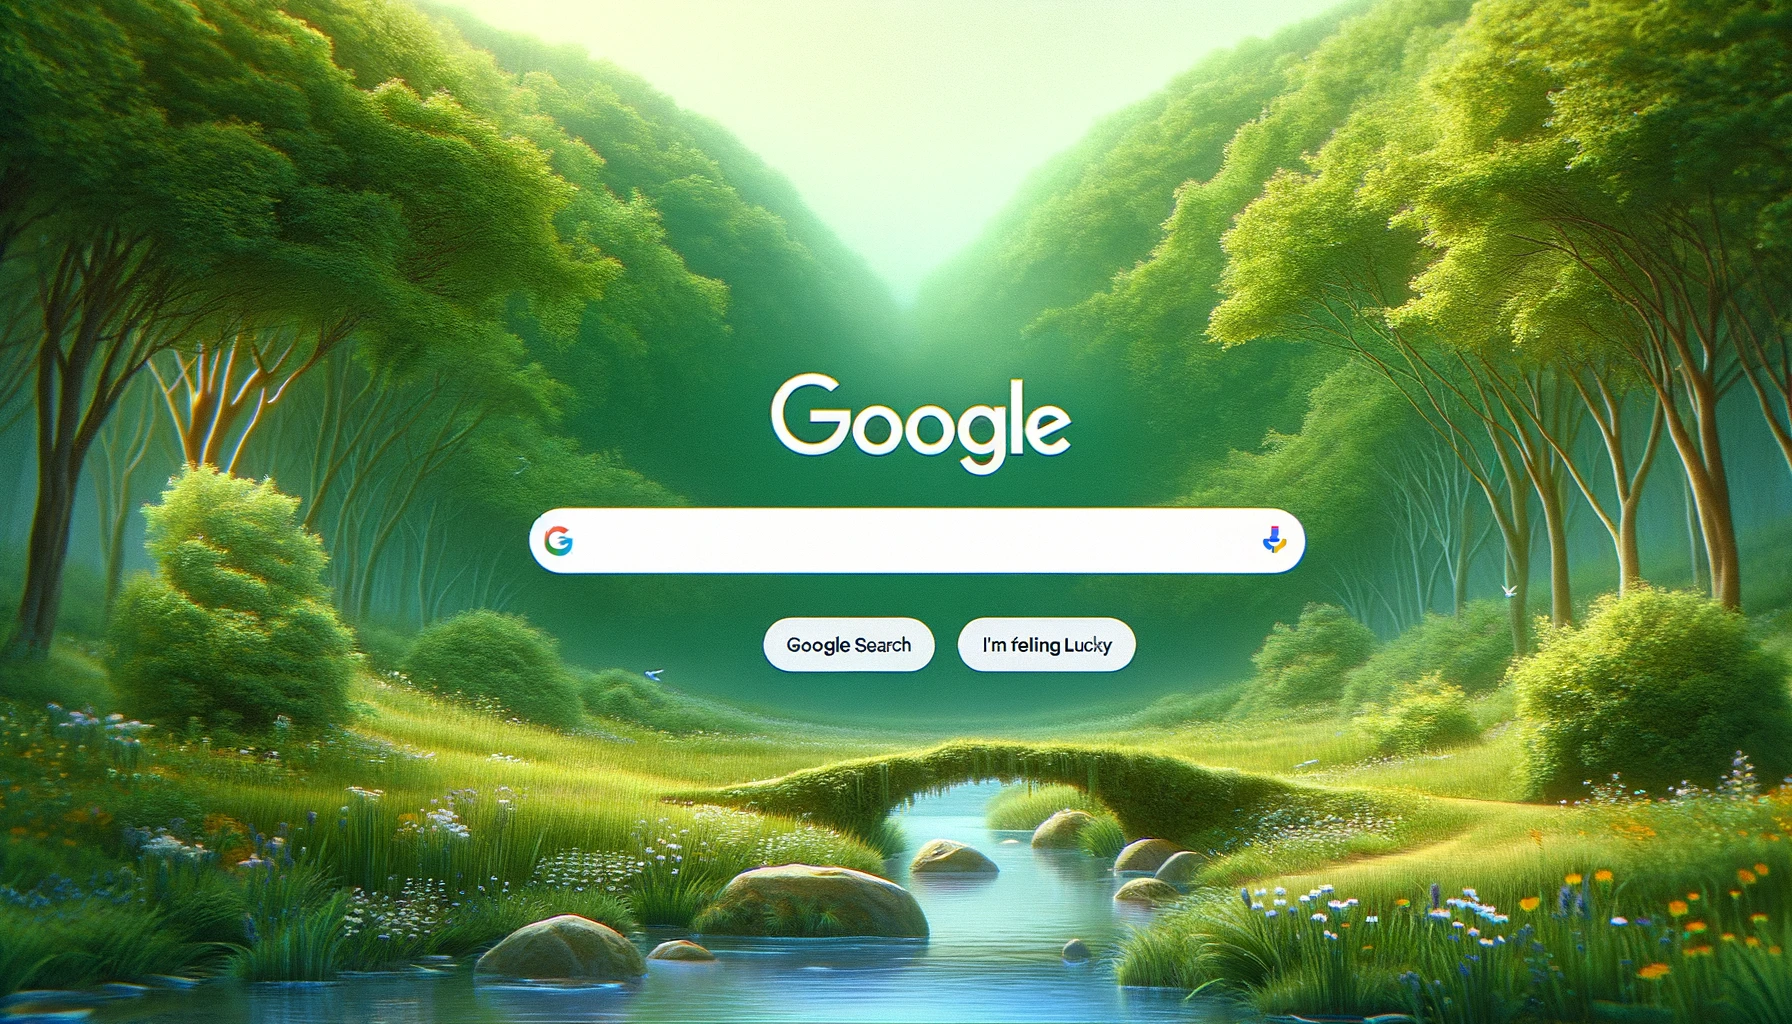 The image above envisions a serene and nature-inspired version of the Google homepage, where technology harmoniously blends with the natural world.